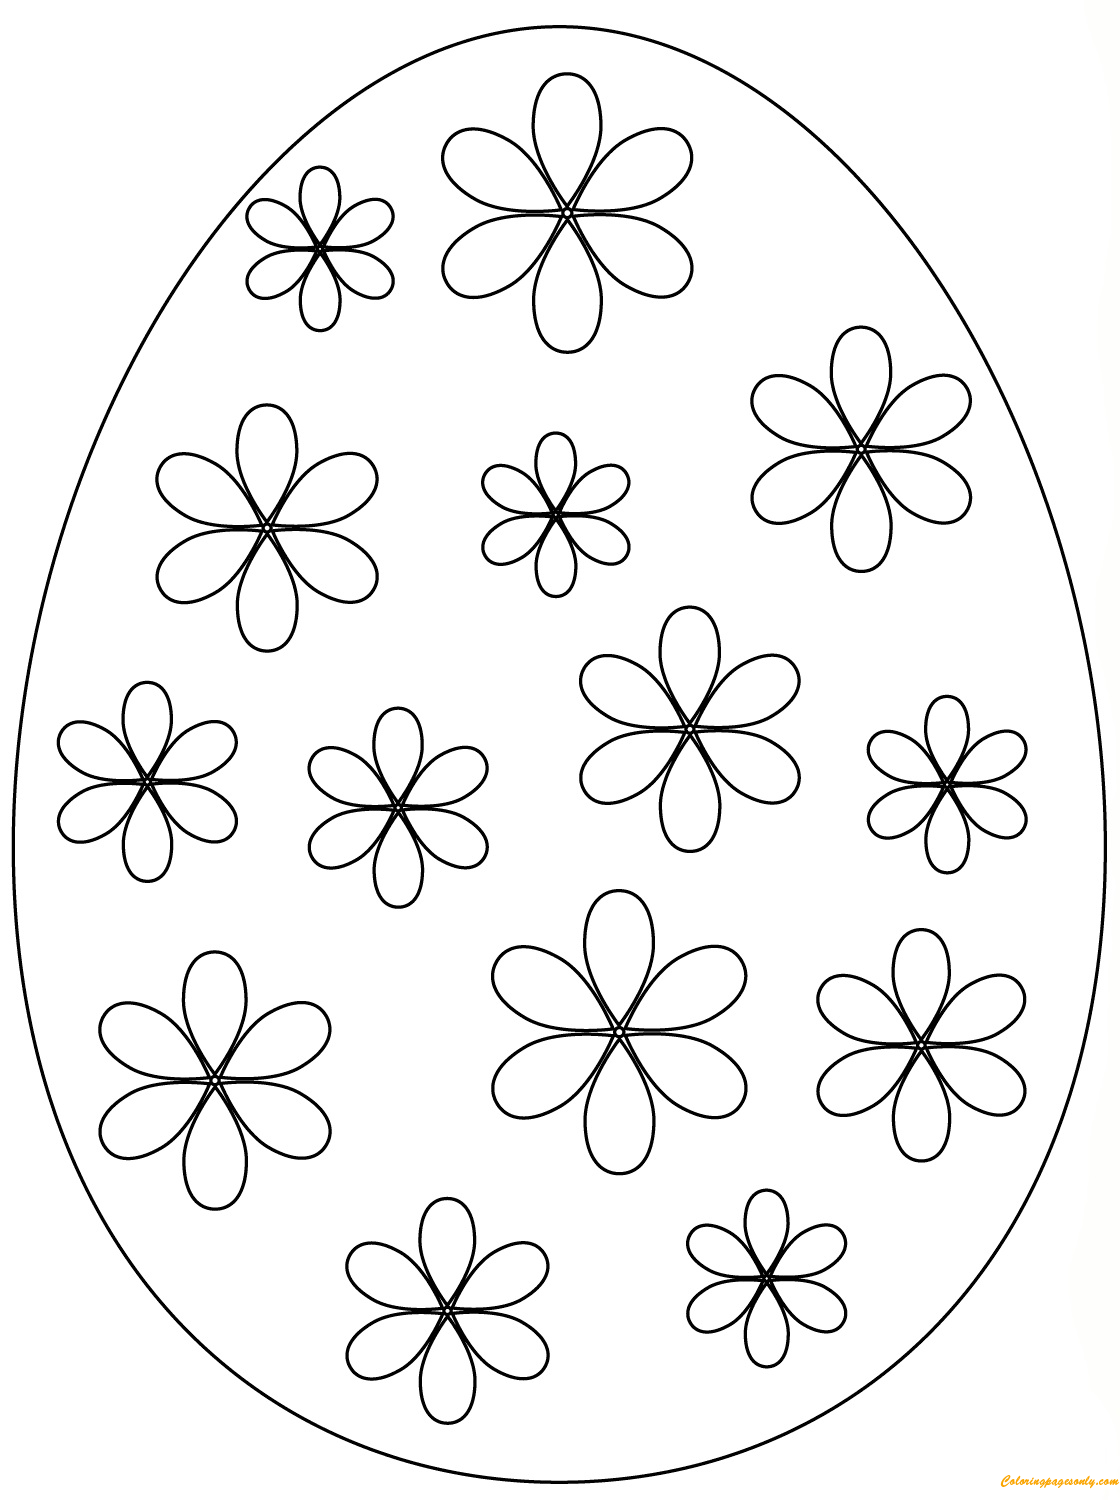 Easter Egg Simple Flowers Coloring Pages - Arts & Culture Coloring Pages -  Free Printable Coloring Pages Online